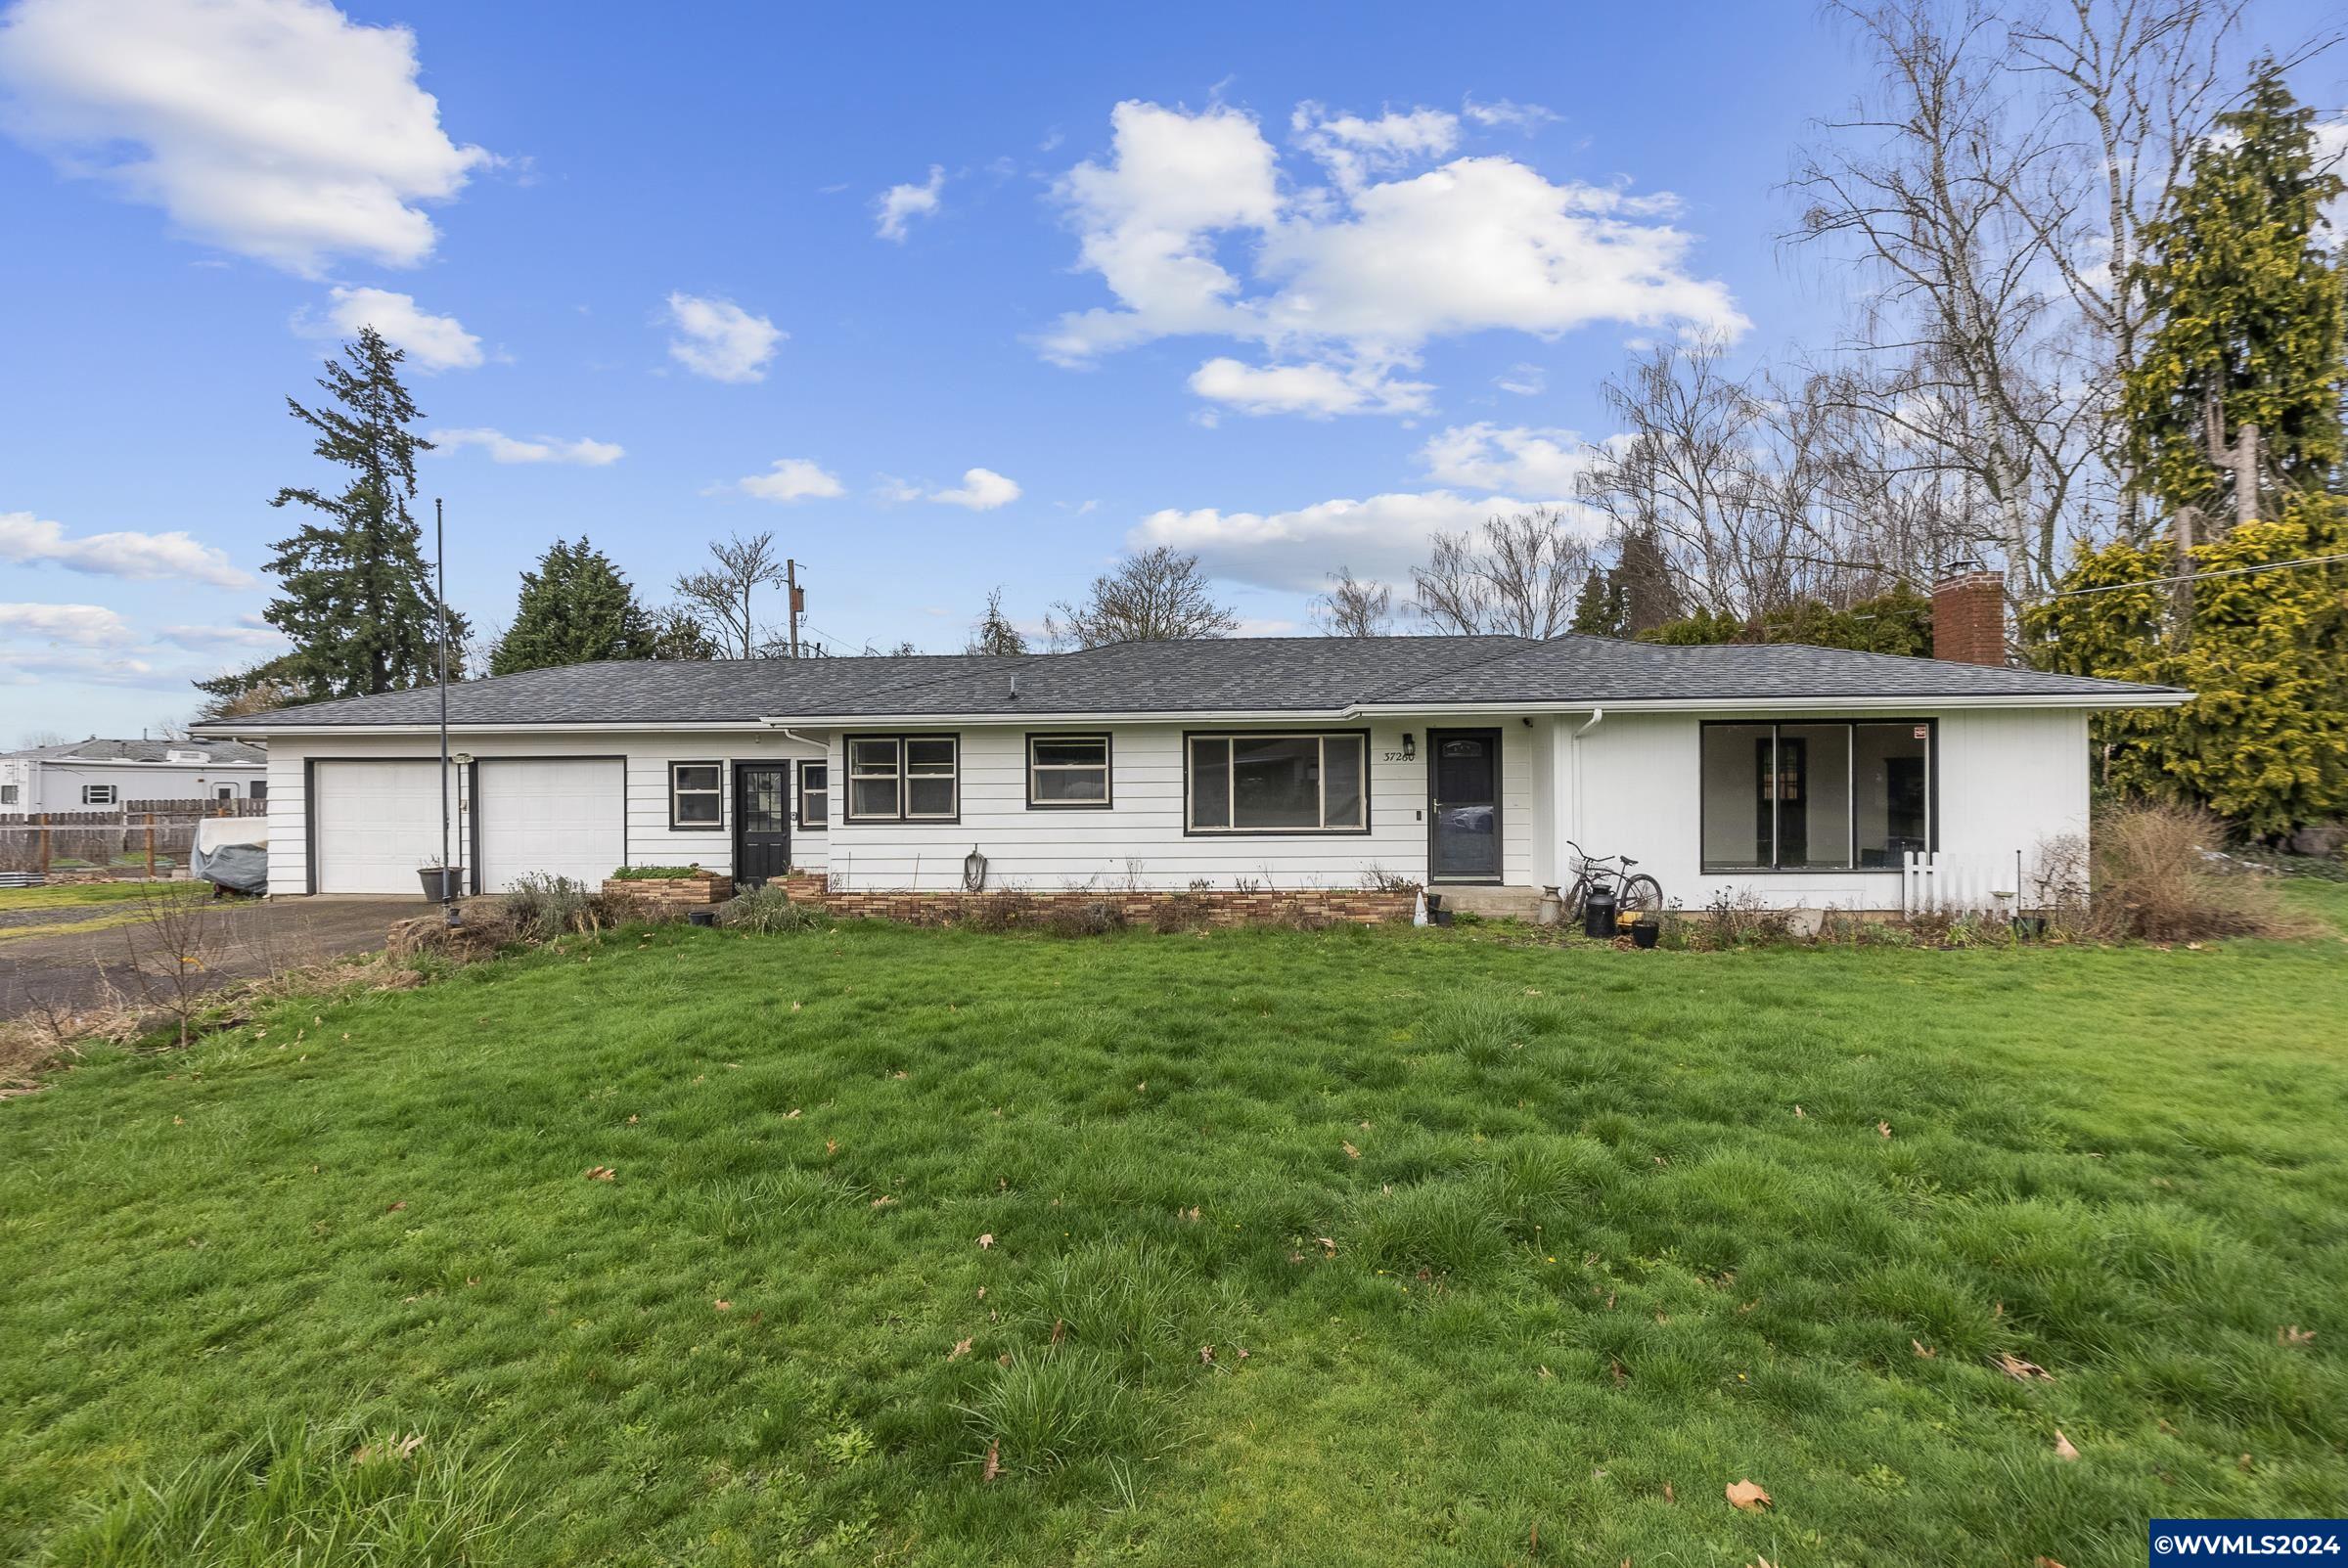 Enjoy modern yet vintage charm in this 3BR 1BA country hm. Lrg lot w/ample garden space, garden shed, cvrd patio, bonus rm, lrg laundry/utility rm, amazing shop area & much more. Updates include: tankless water heater '21, refinished wood flrs '24, new  kitchen flooring '24, new interior paint, new wood stove insert '21, new septic tank & power panel in 20/21 & drain lines installed in 2007. This home is perfect for commuting to surrounding cities & low county taxes! Agent is related to seller.  Enjoy modern yet vintage charm in this 3 bd 1 ba country home. Large lot with ample garden space, garden shed, covered patio, bonus room, large laundry/utility room, amazing shop area and much more. Updates include: tankless water heater '21, refinished wood floors '24, new  kitchen flooring '24, new interior paint, new wood stove insert '21, new septic tank and power panel in 20/21 and drain lines installed in 2007. This home is perfect for commuting to surrounding cities and low county taxes! Be sure to take a look at this hidden Lebanon gem. Agent is related to seller.